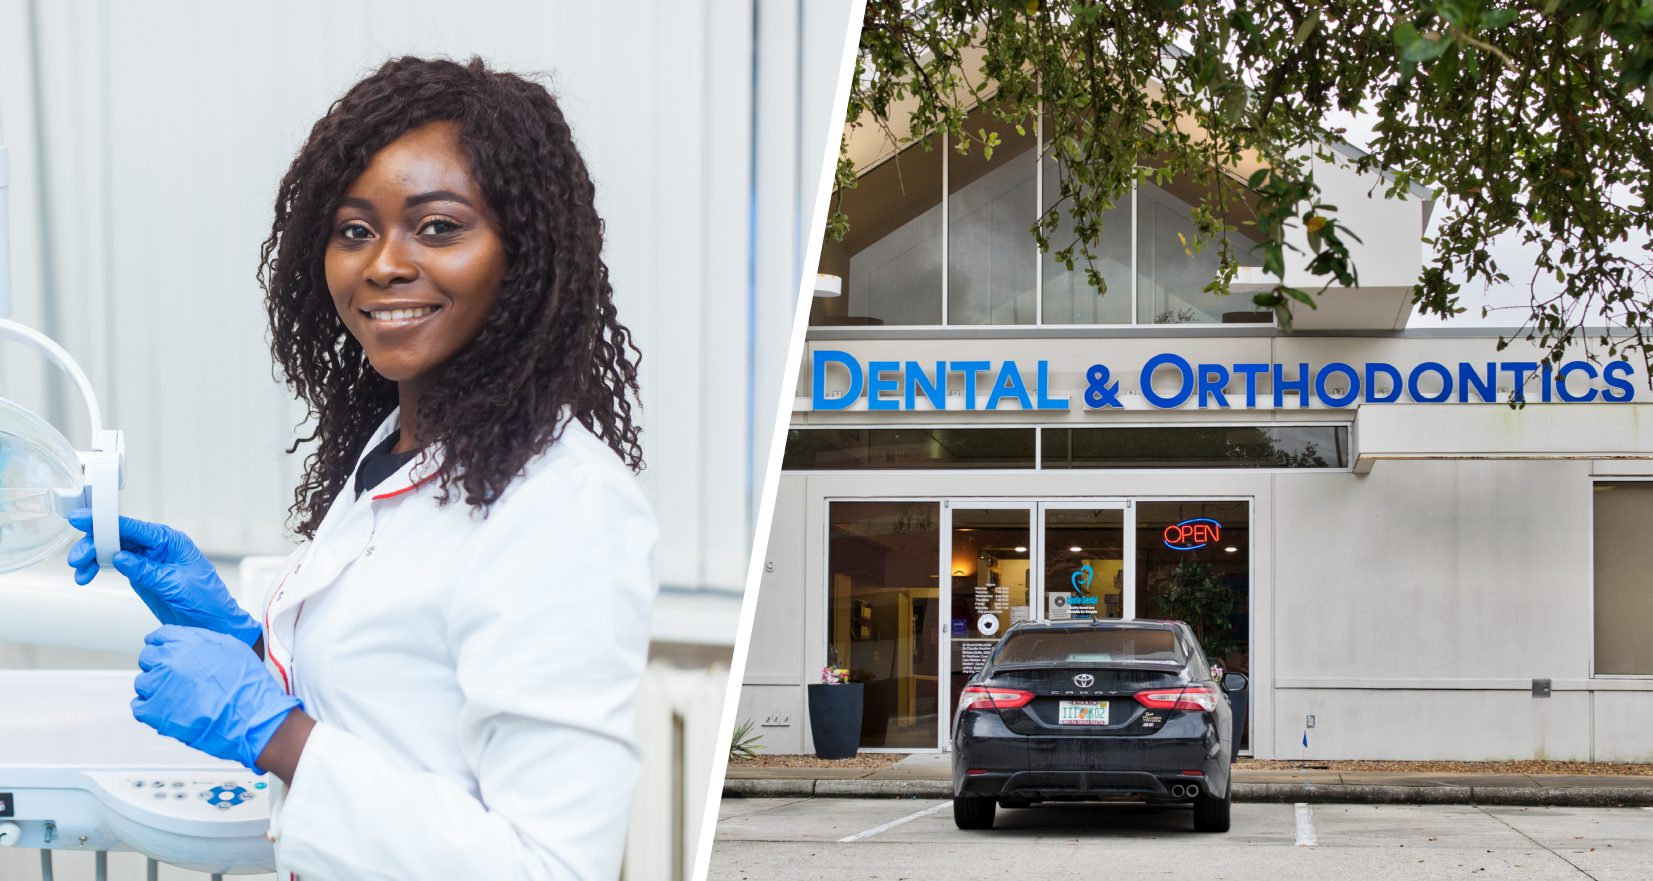 My Social Practice - Social Media Marketing for Dental & Dental Specialty Practices - local search for dentists